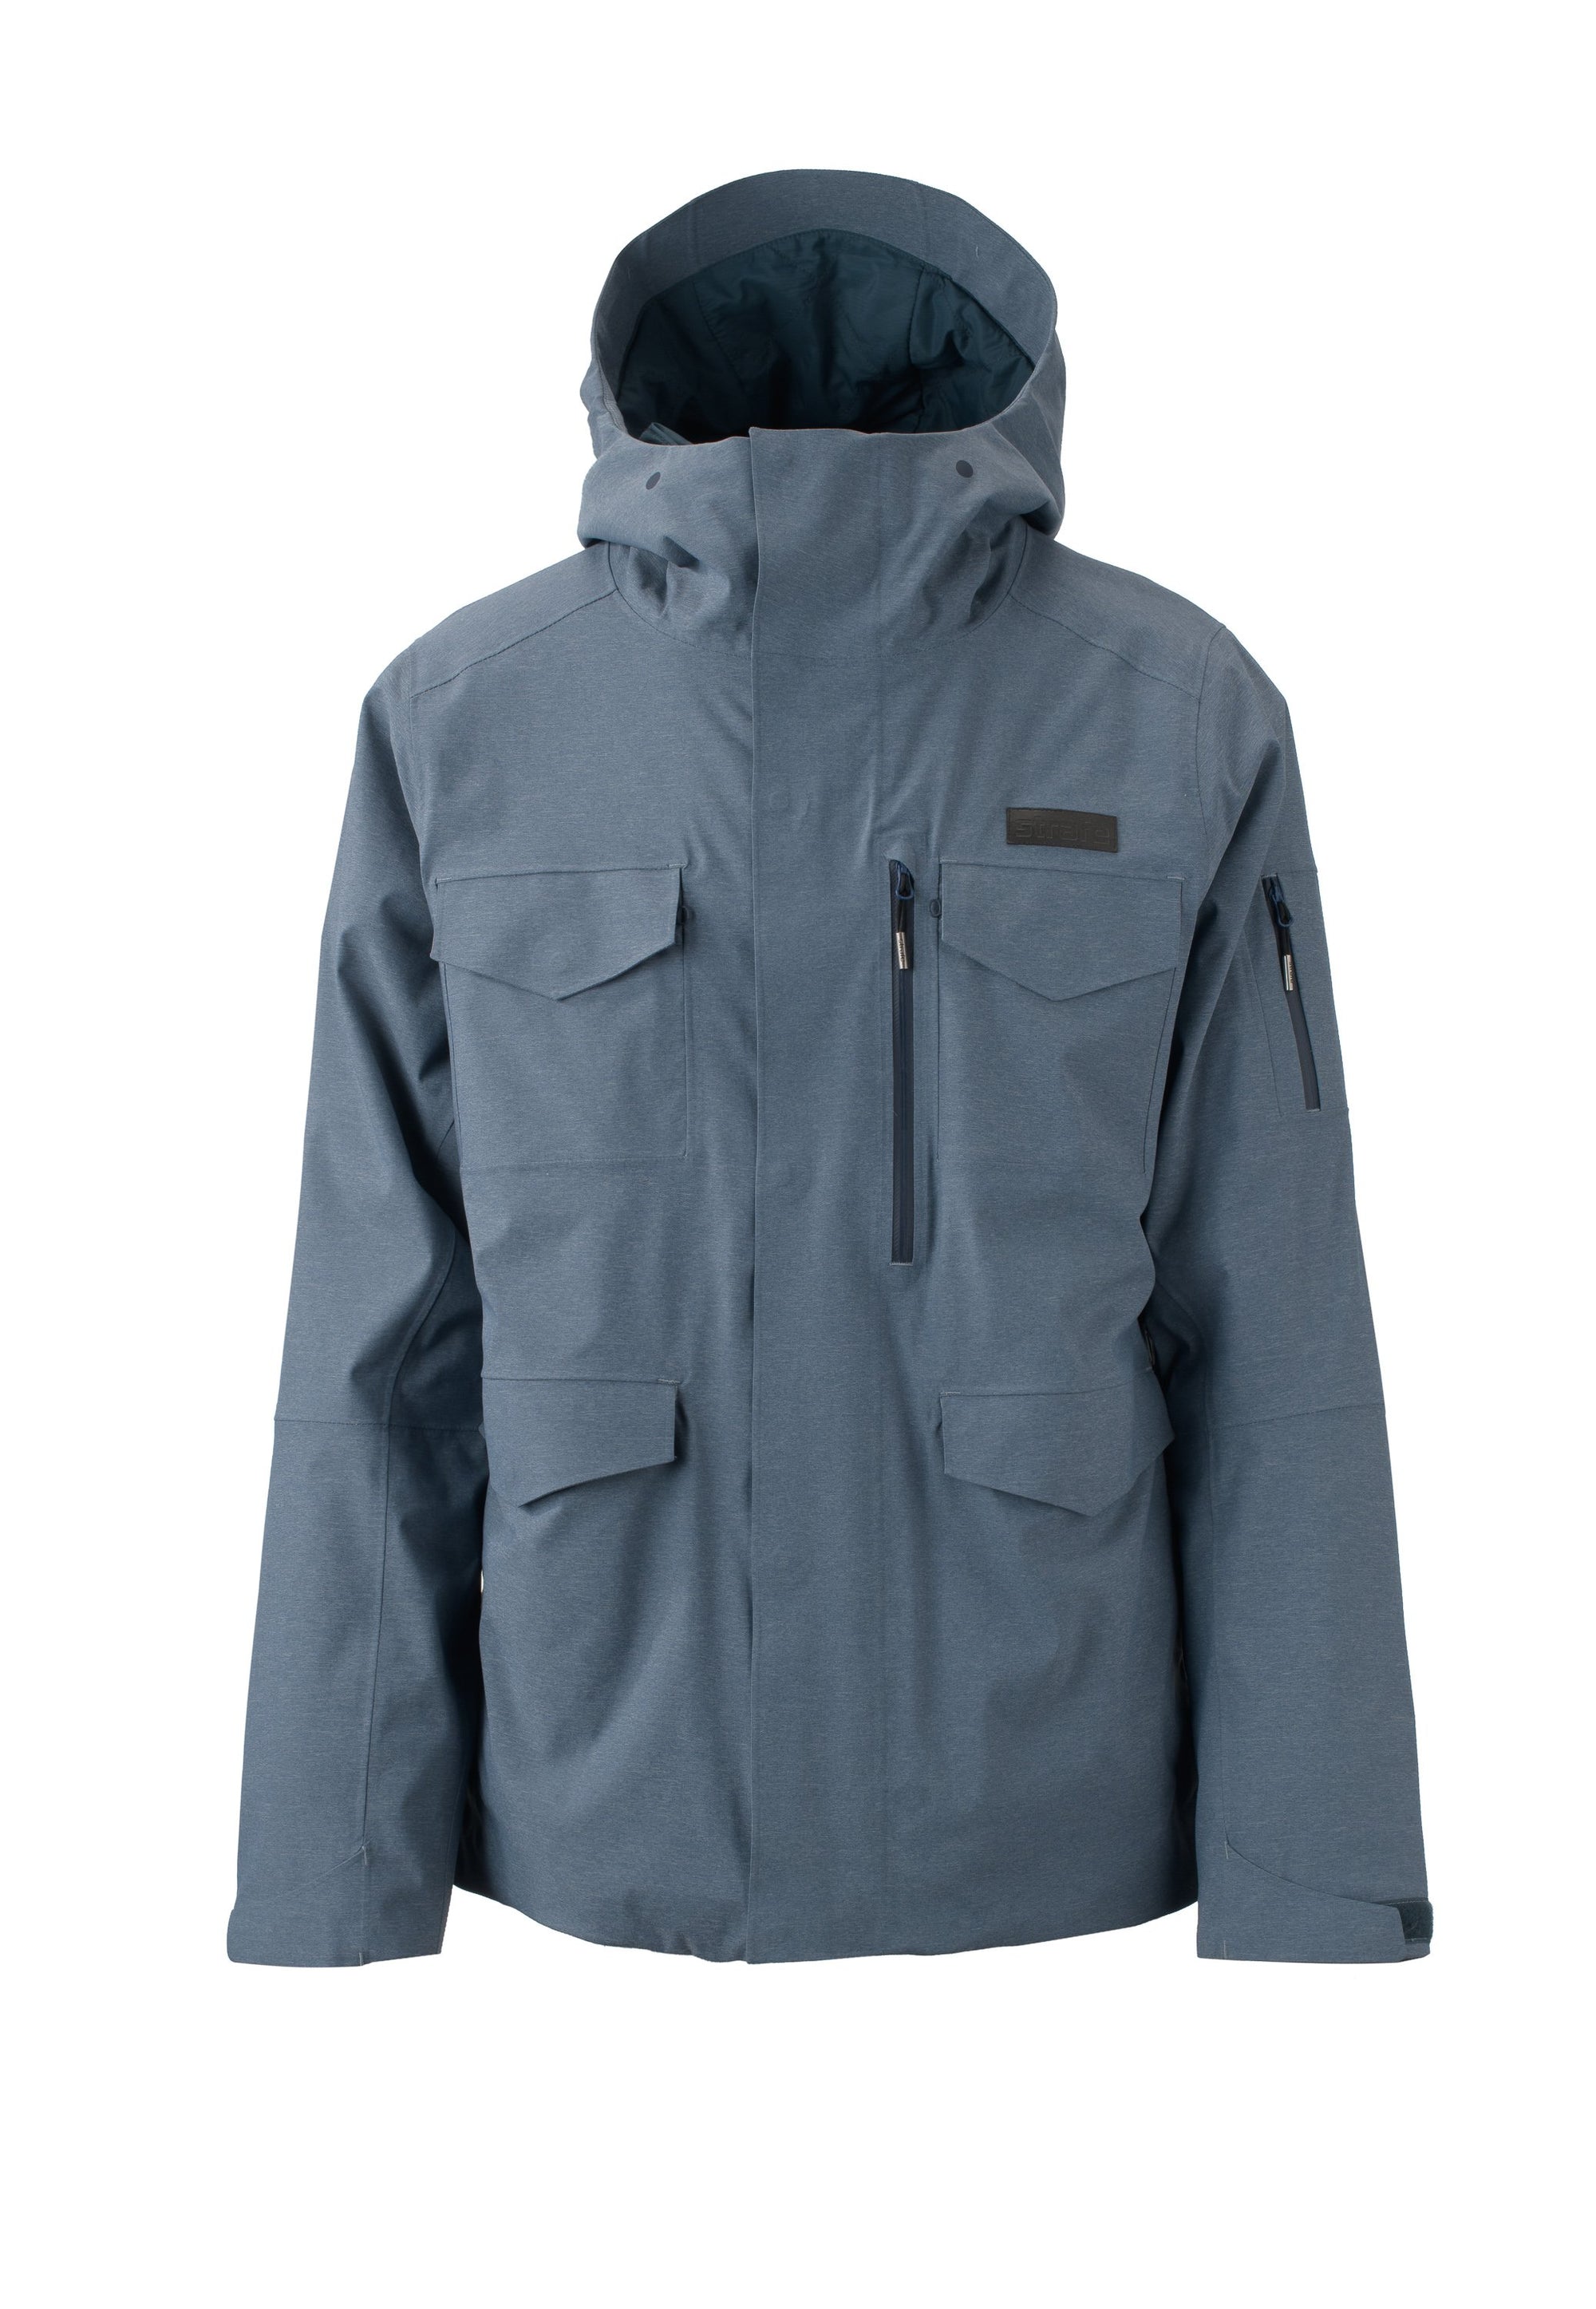 Products - Strafe Outerwear